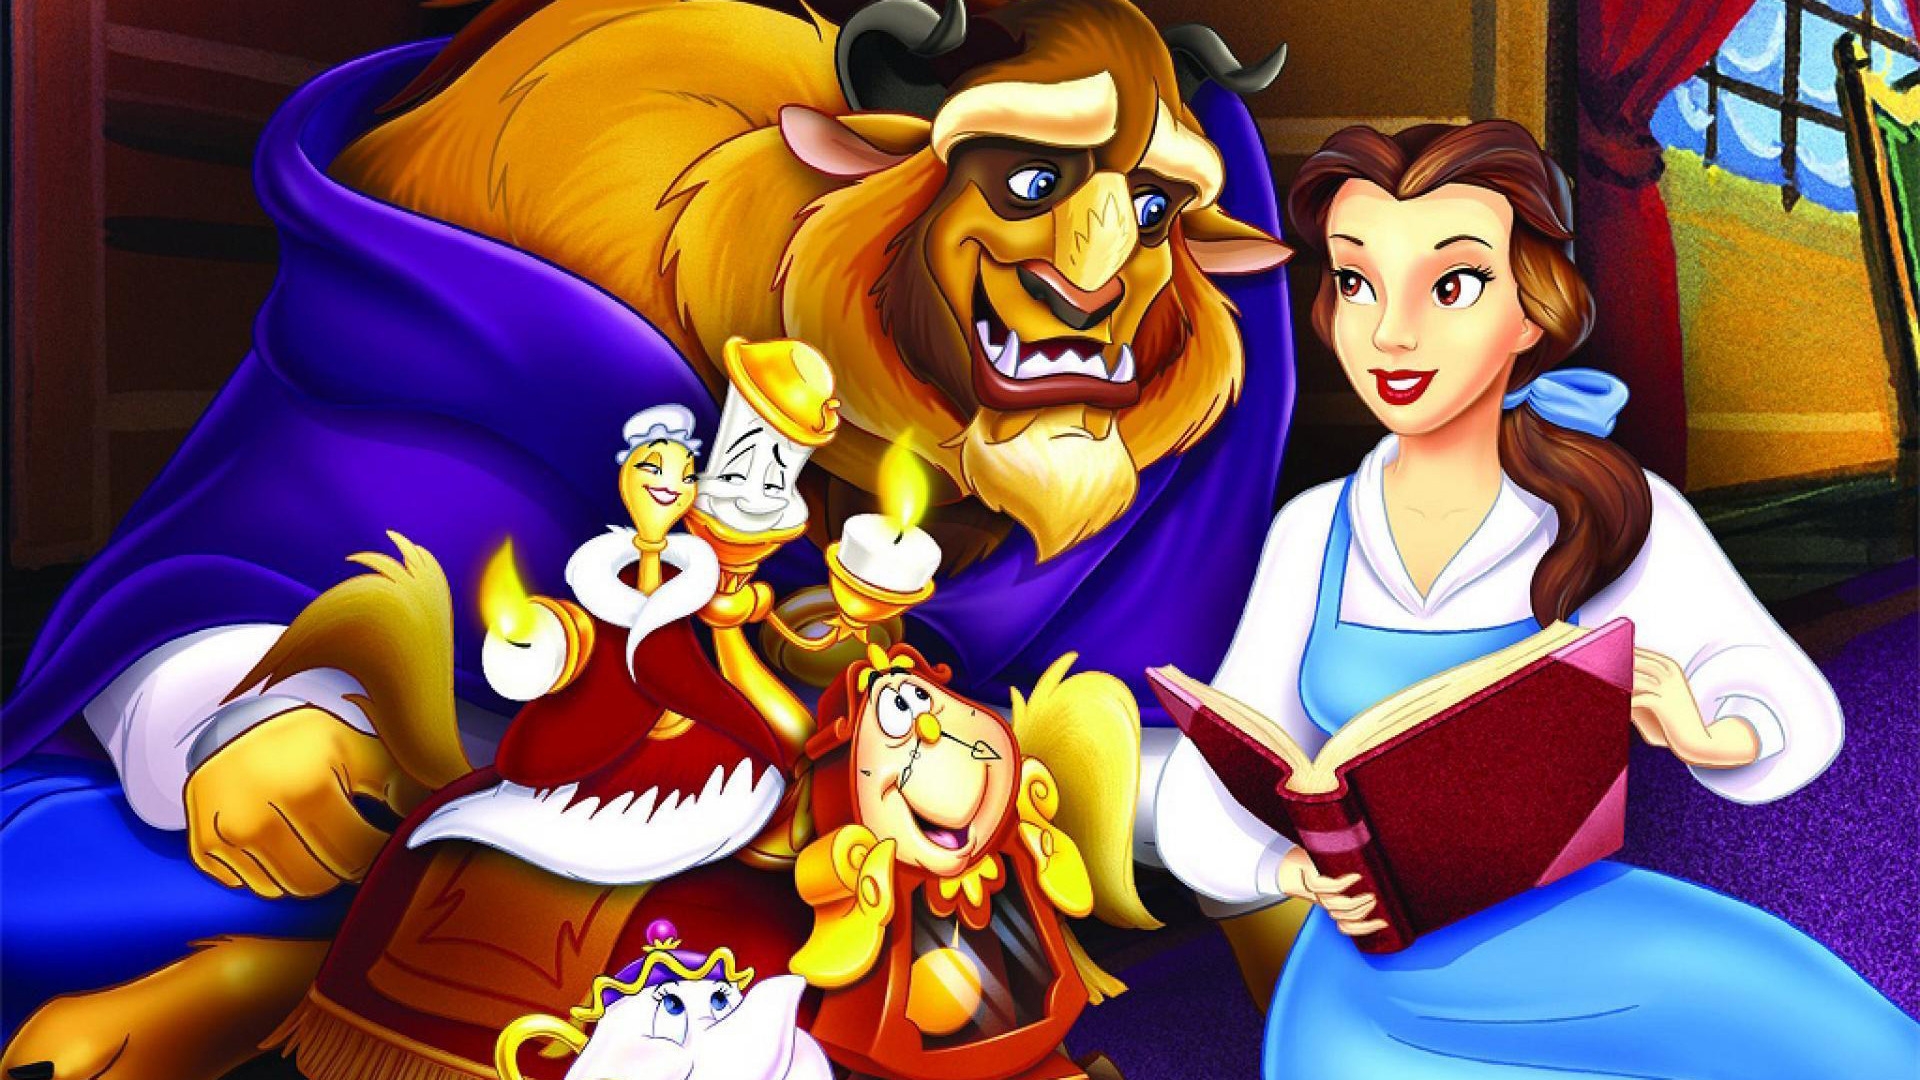 Beauty and the Beast for 1920 x 1080 HDTV 1080p resolution